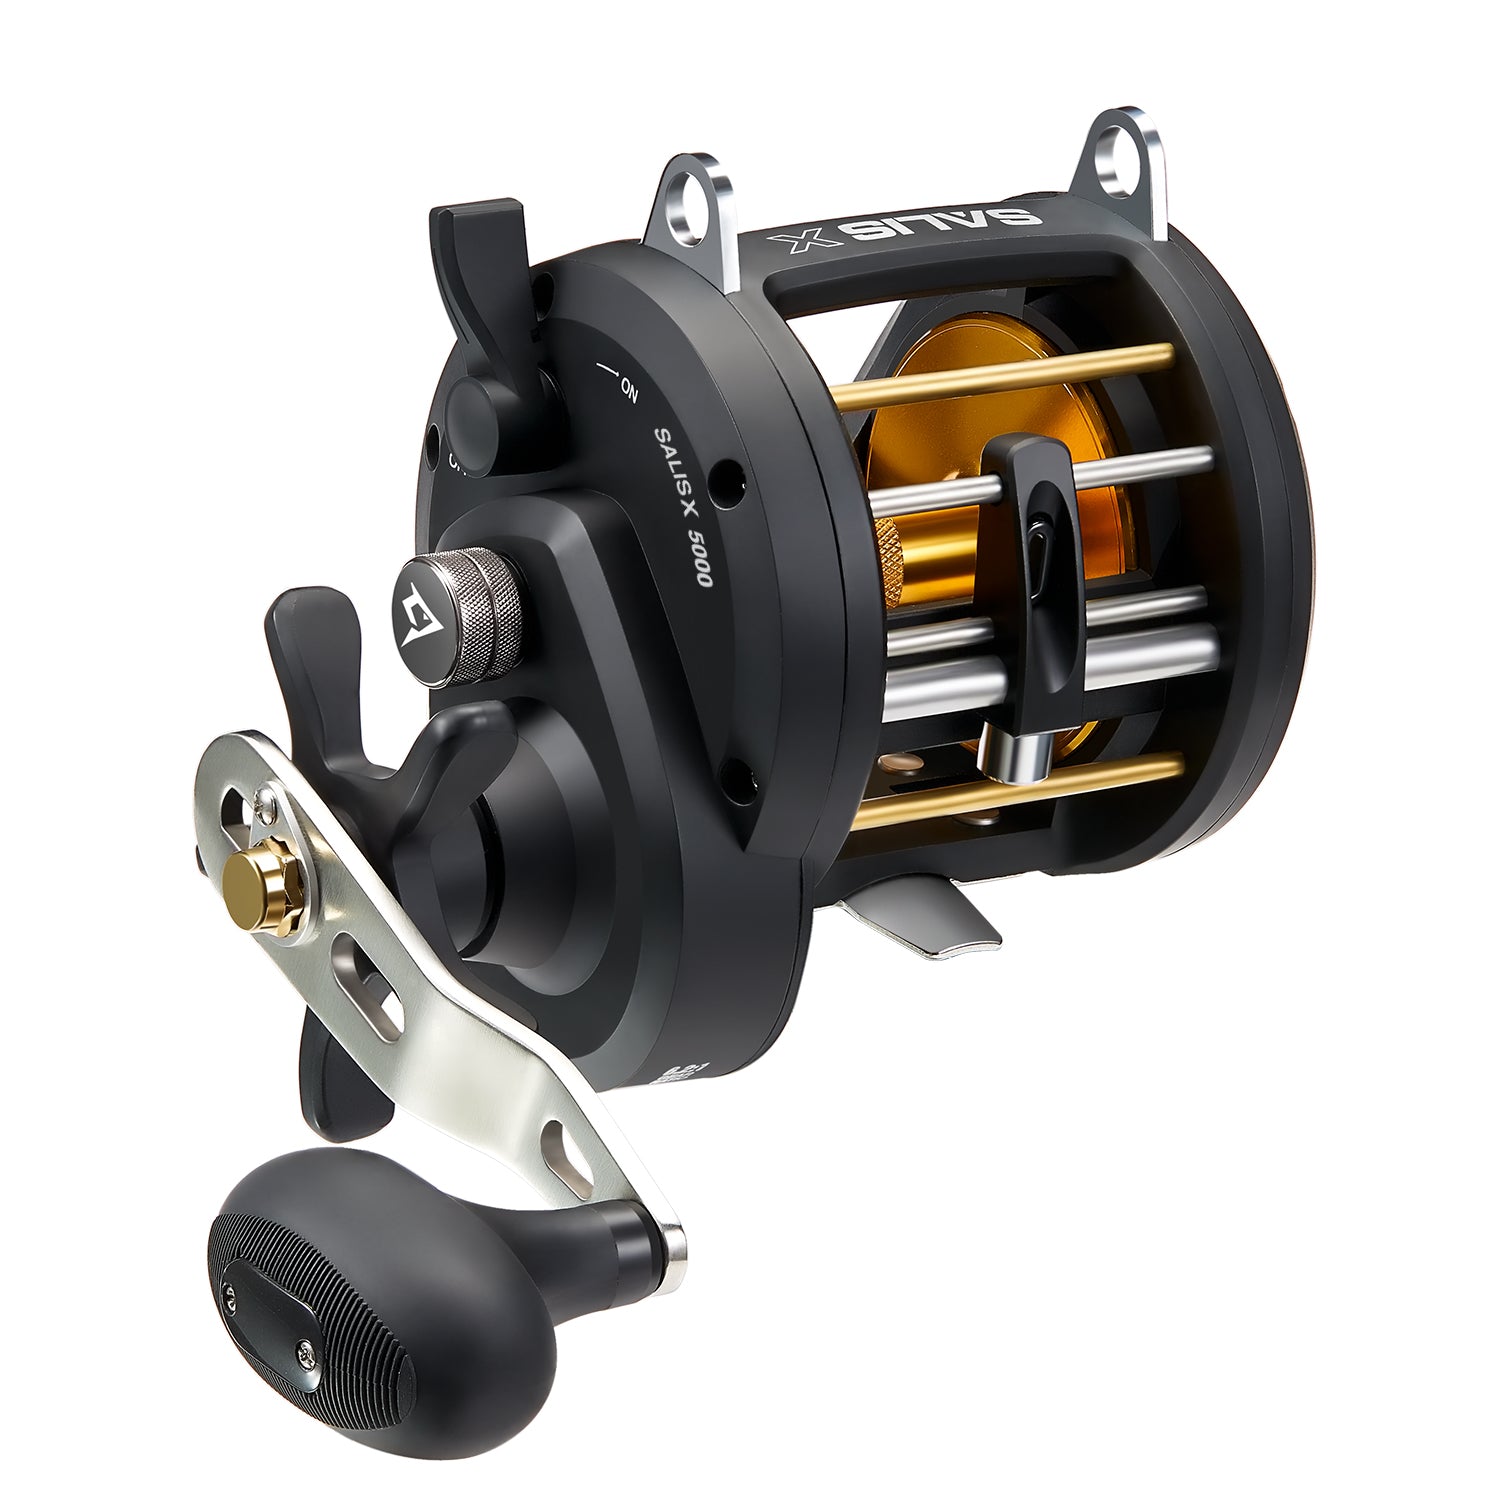 Piscifun High Speed Conventional Levelwind Trolling Reels - fishingnew